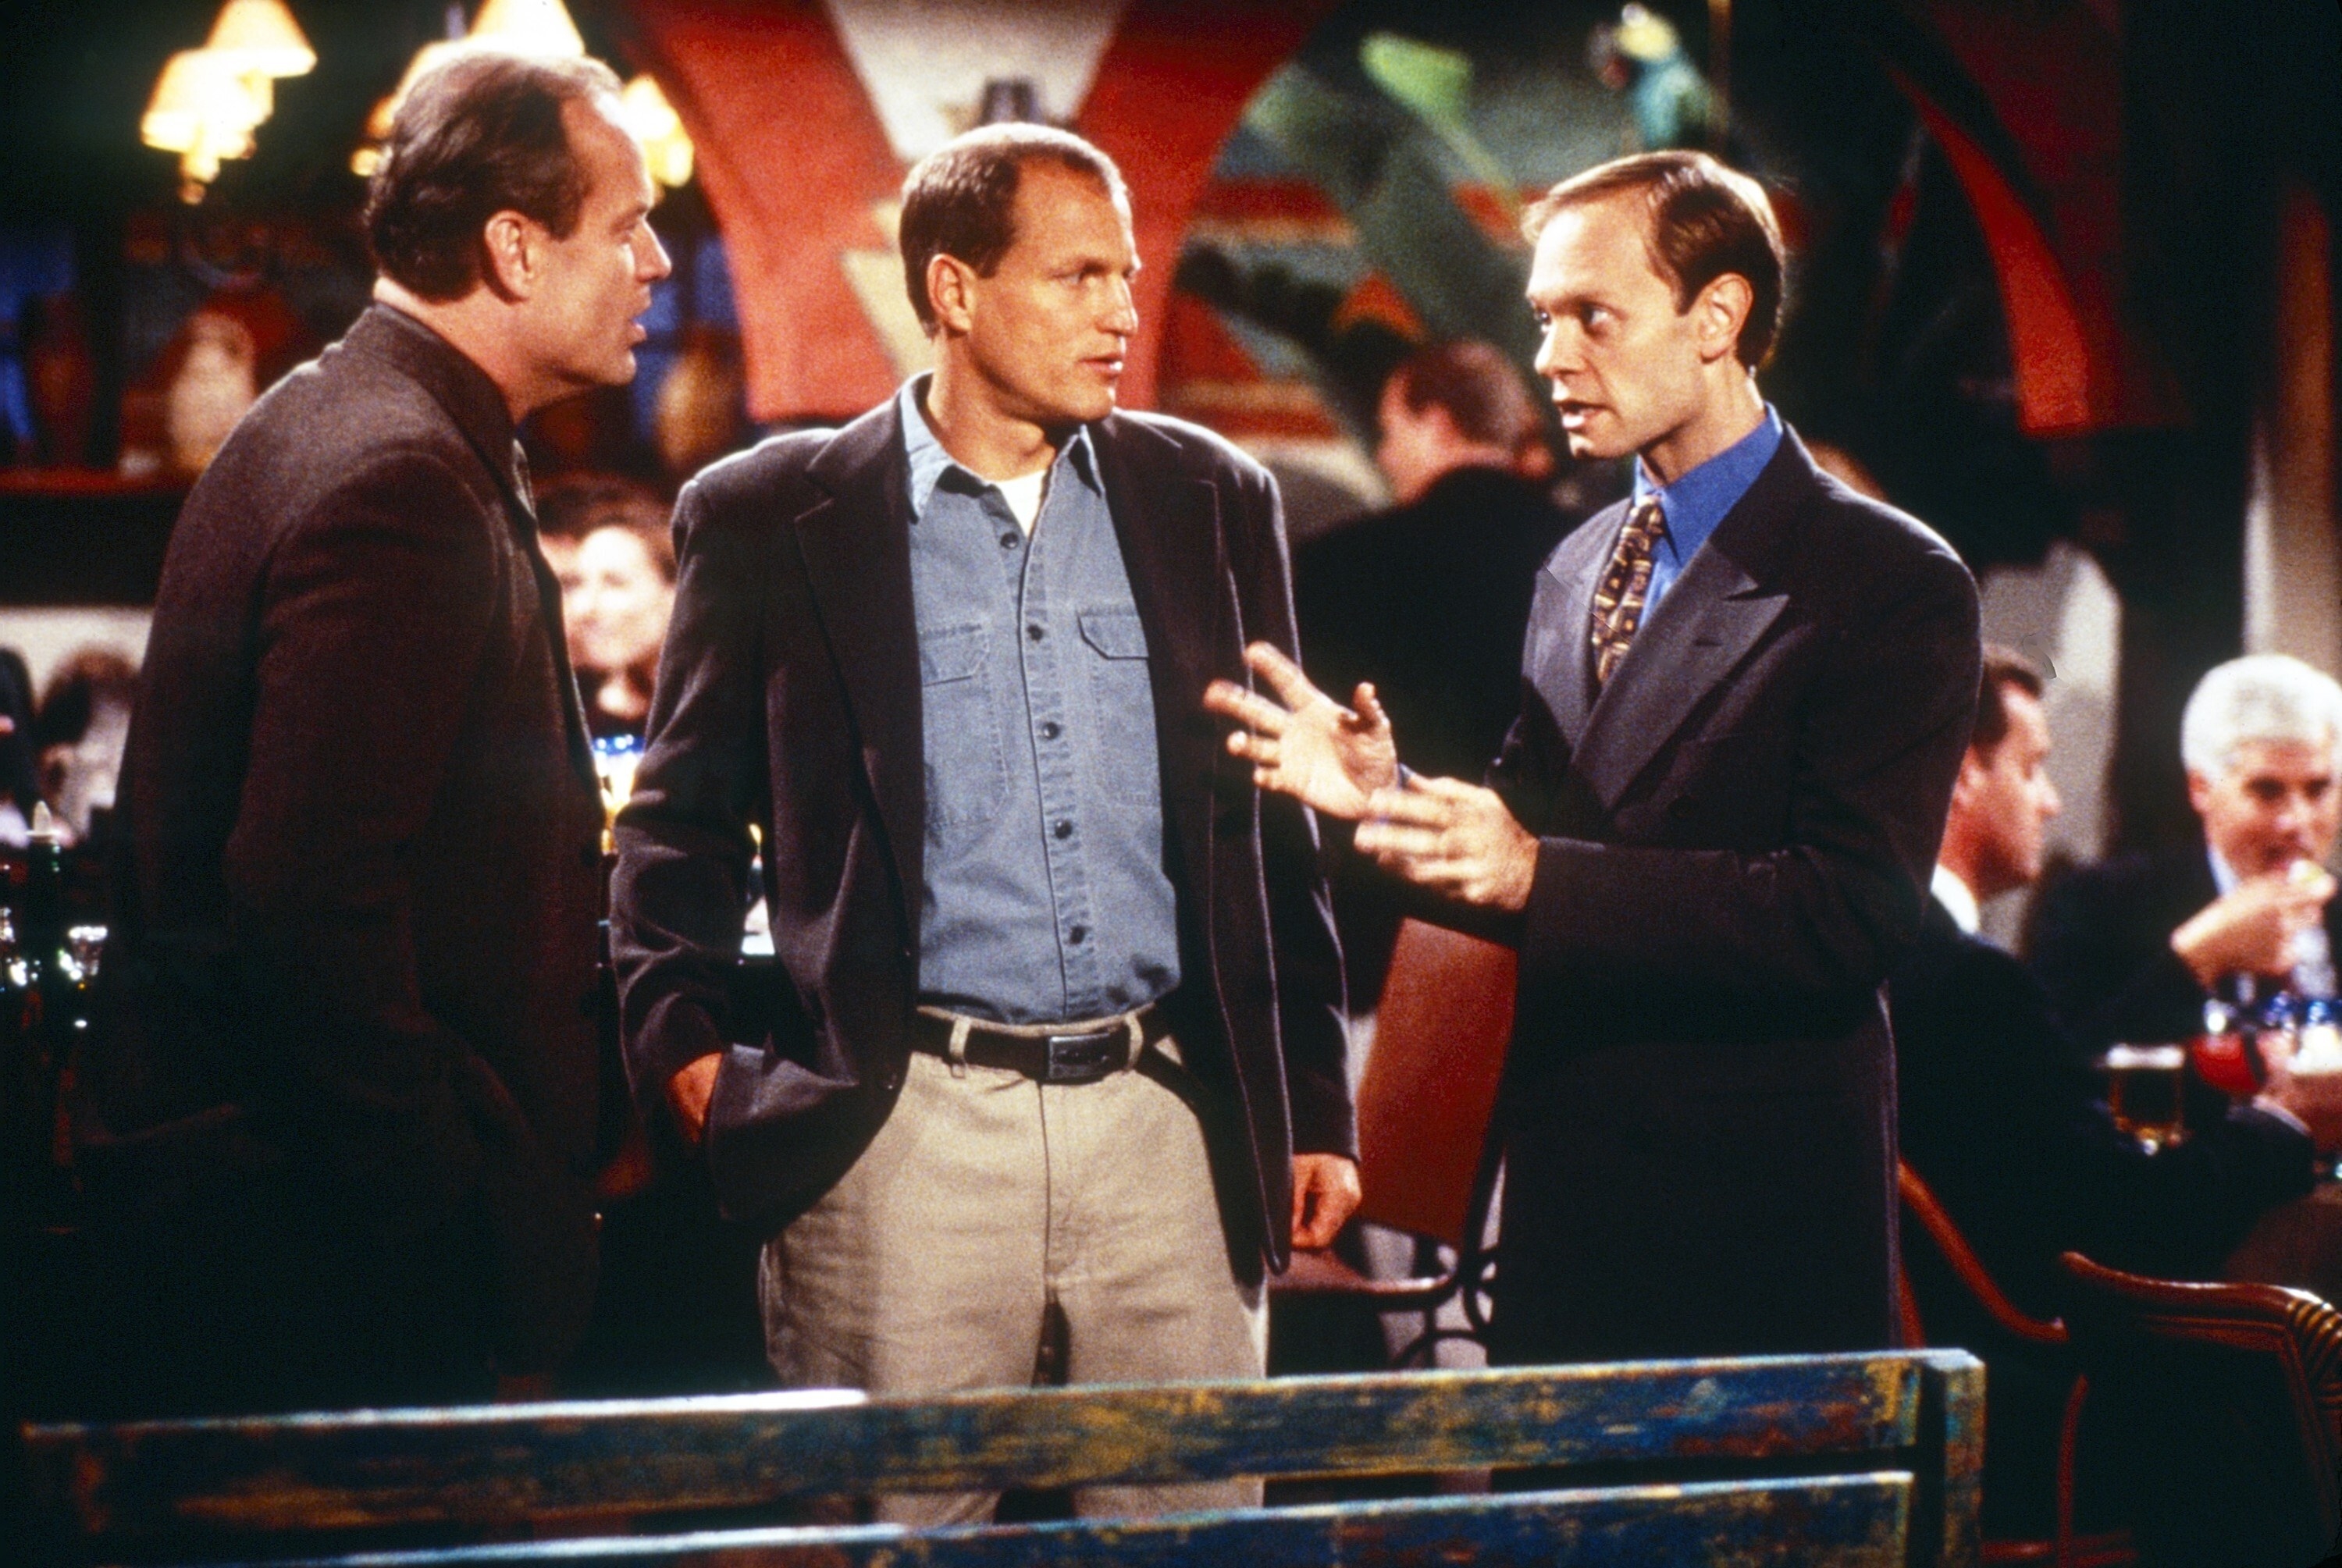 Kelsey Grammer, Woody Harrelson, and David Hyde Pierce have a conversation